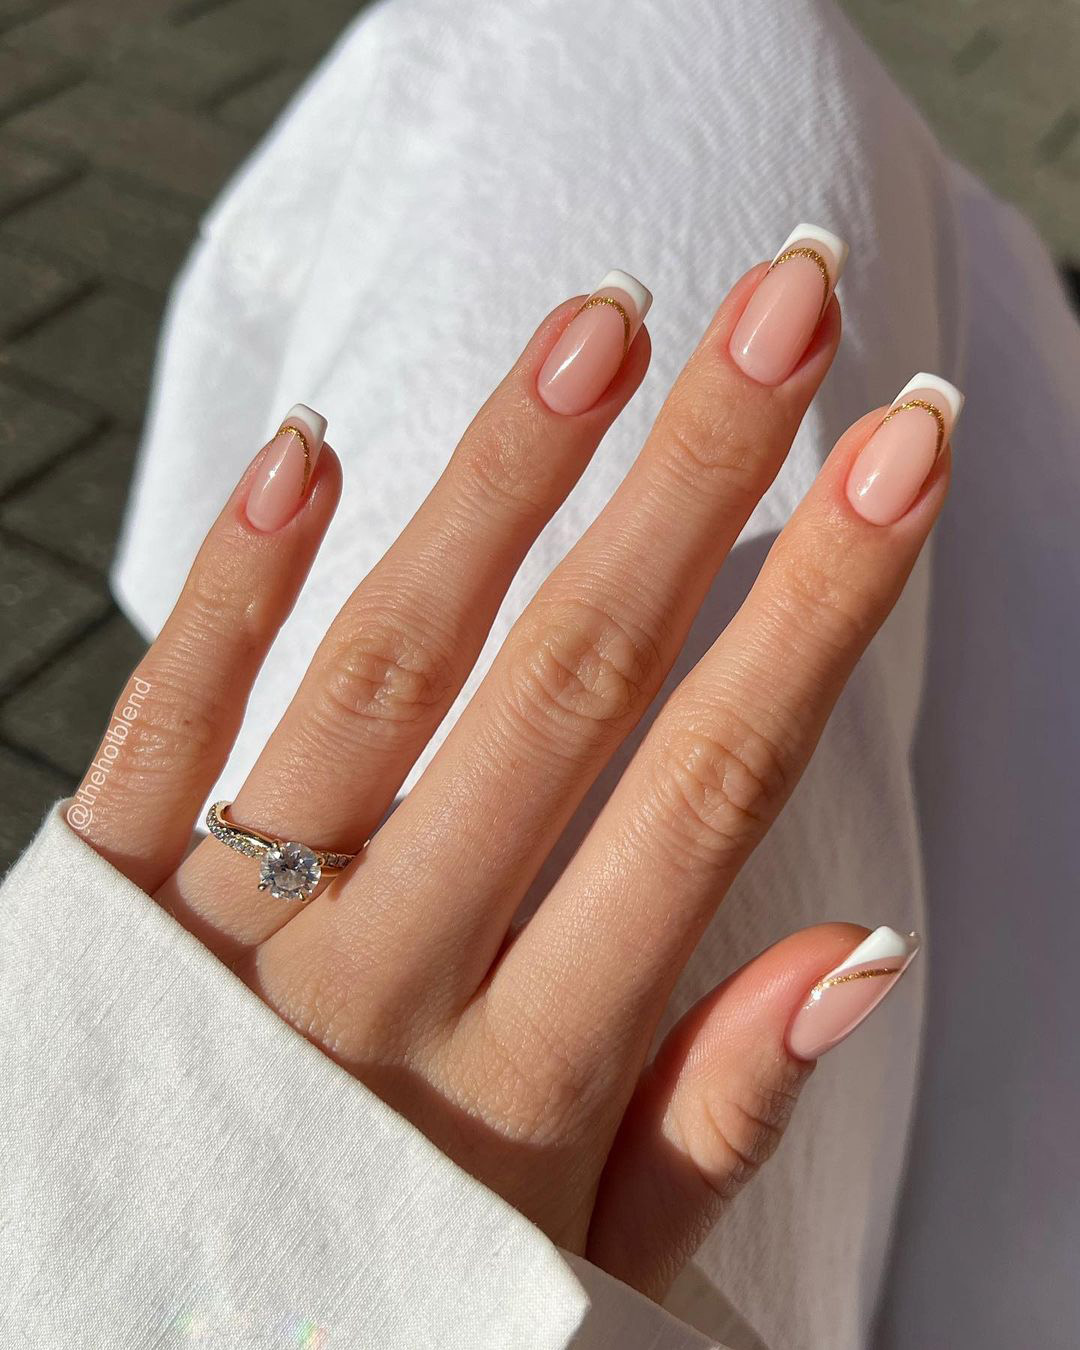 french wedding nails long nails with white and gold glitter thehotblend